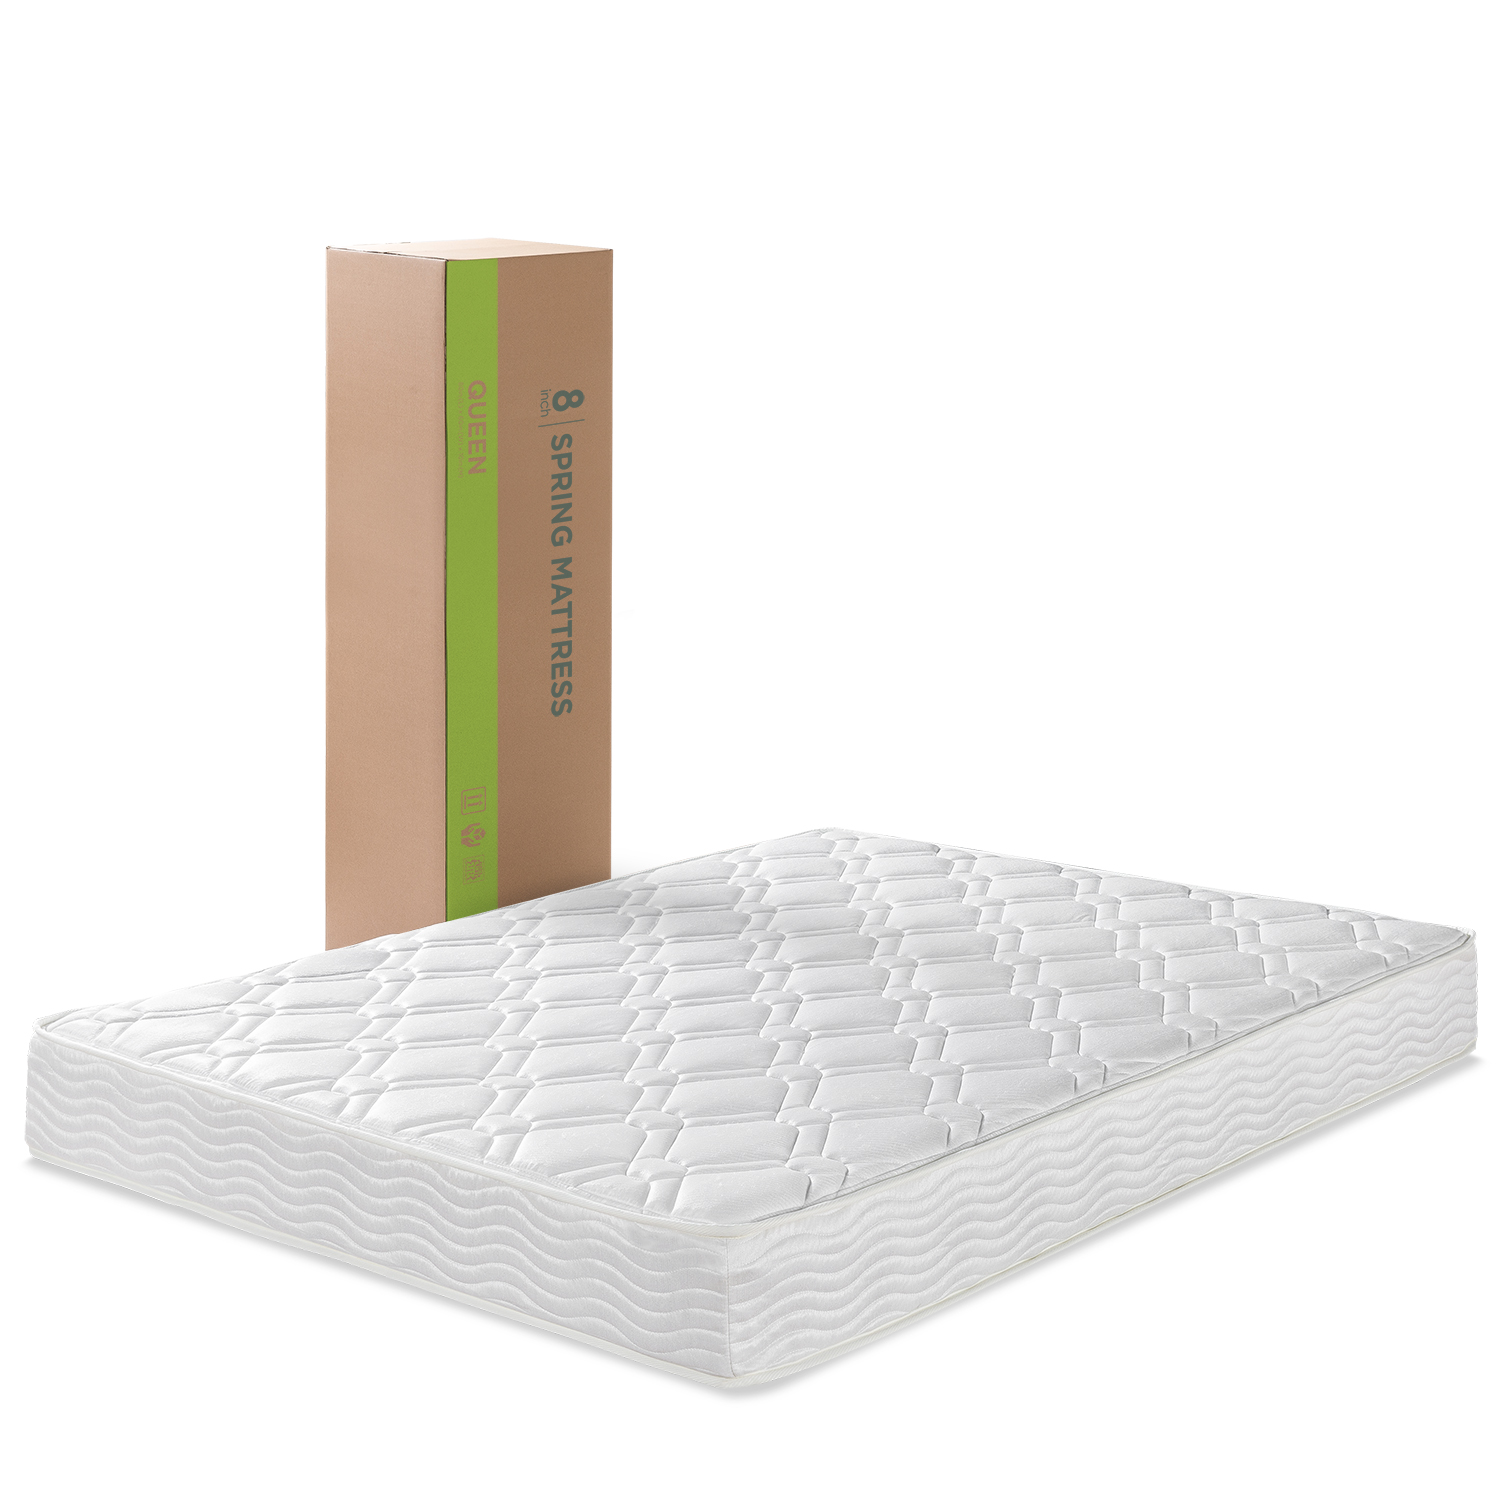 Slumber 1 by Zinus Support 8" Spring Mattress, Twin - image 8 of 10